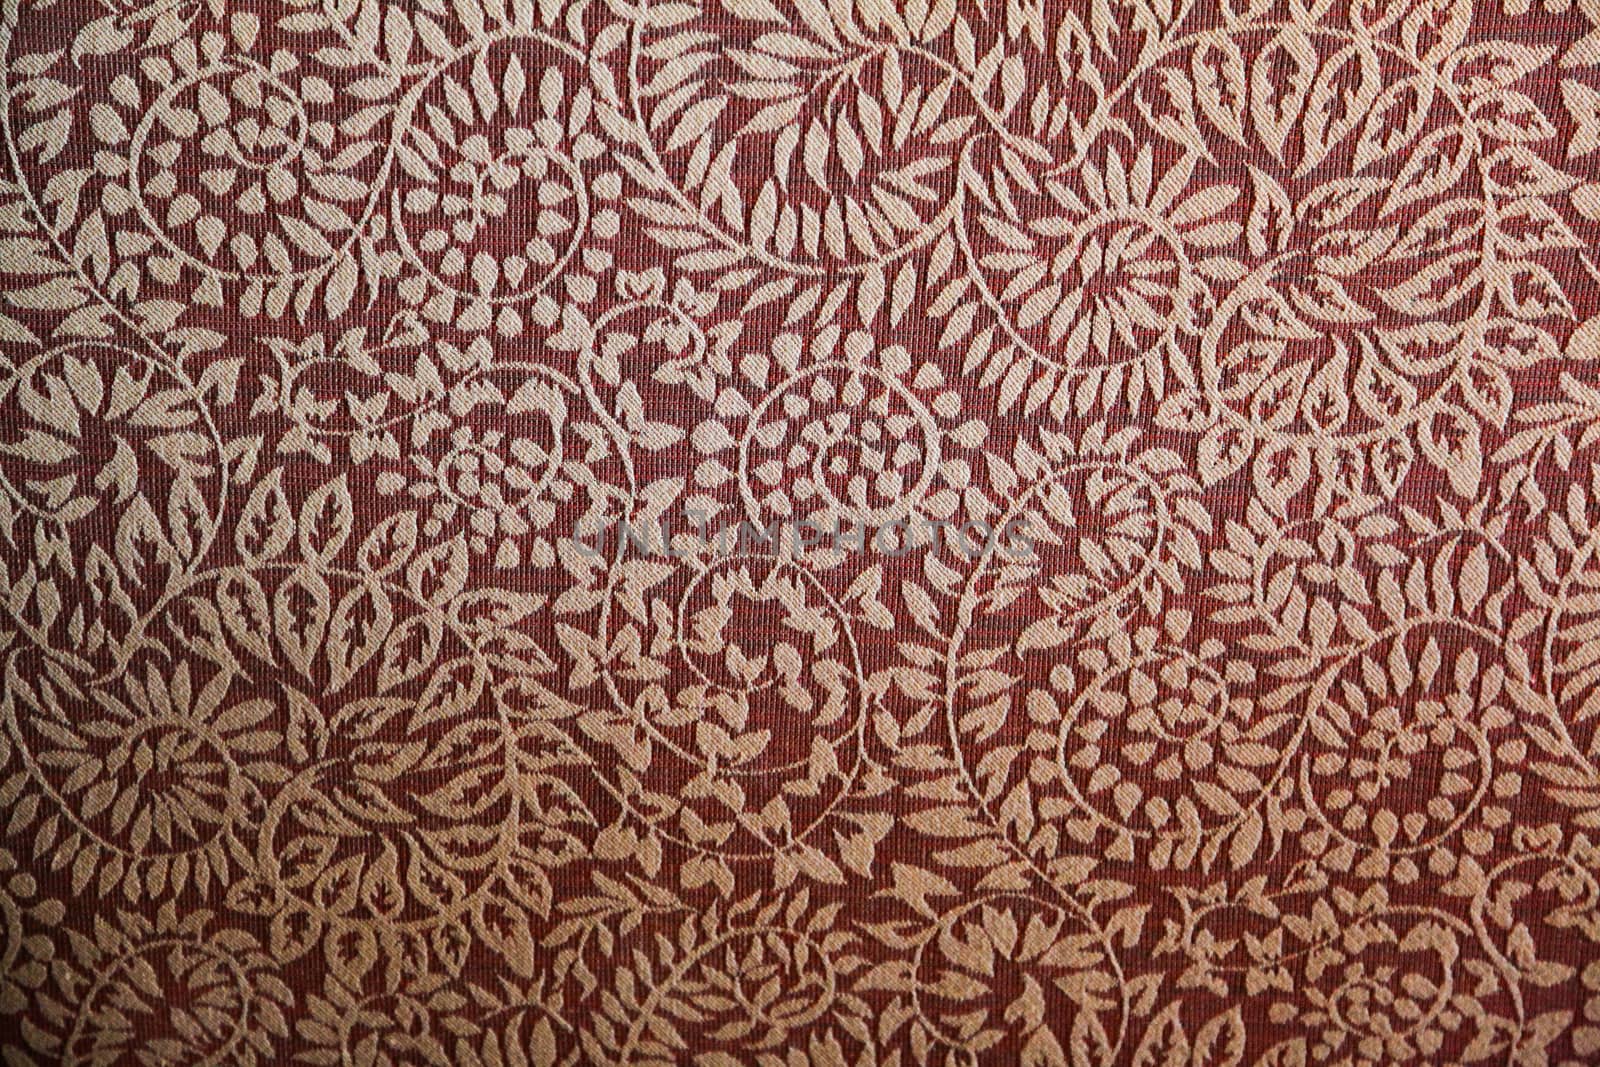 A white leaf like pattern on red fabric